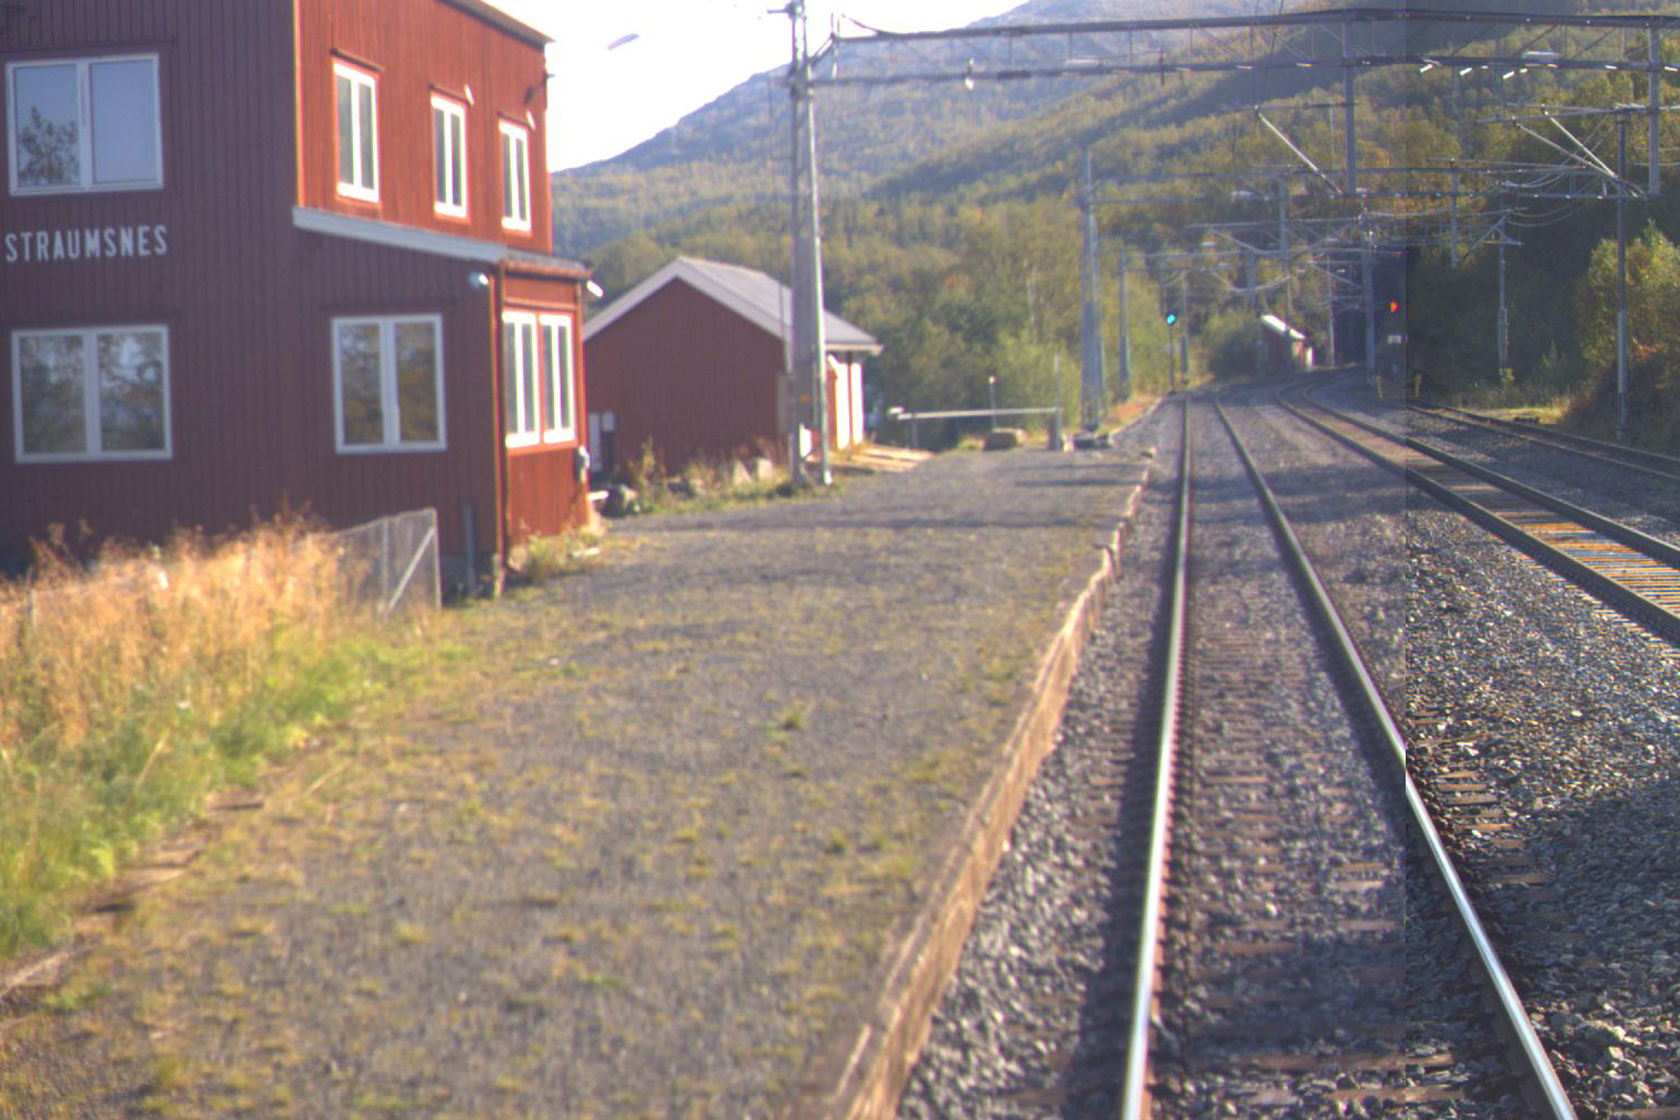 Tracks and station building at Straumsnes station